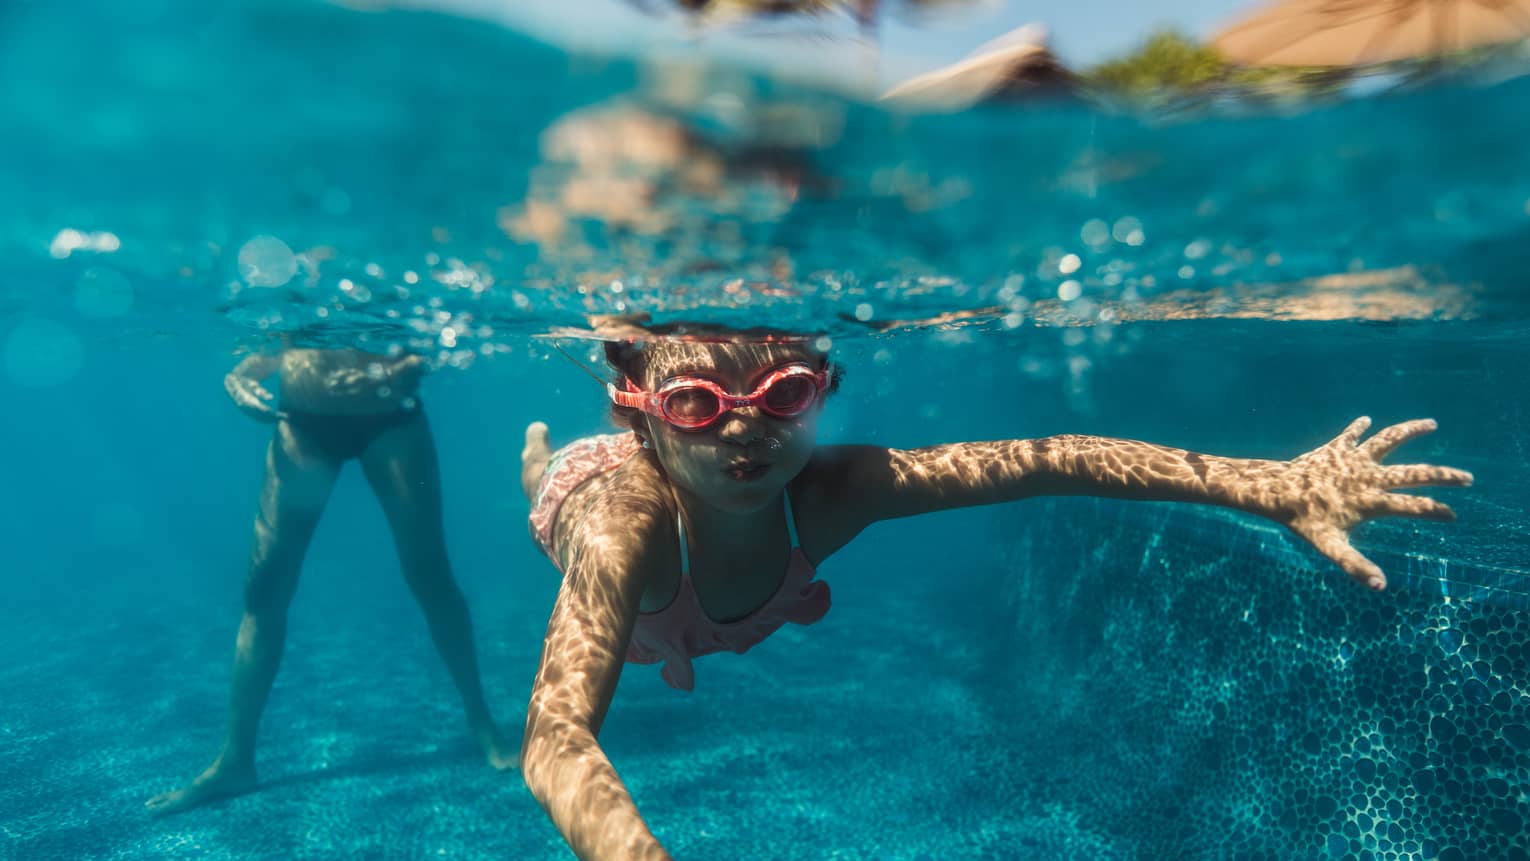 A young boy snorkeling in a pool with red goggles on.